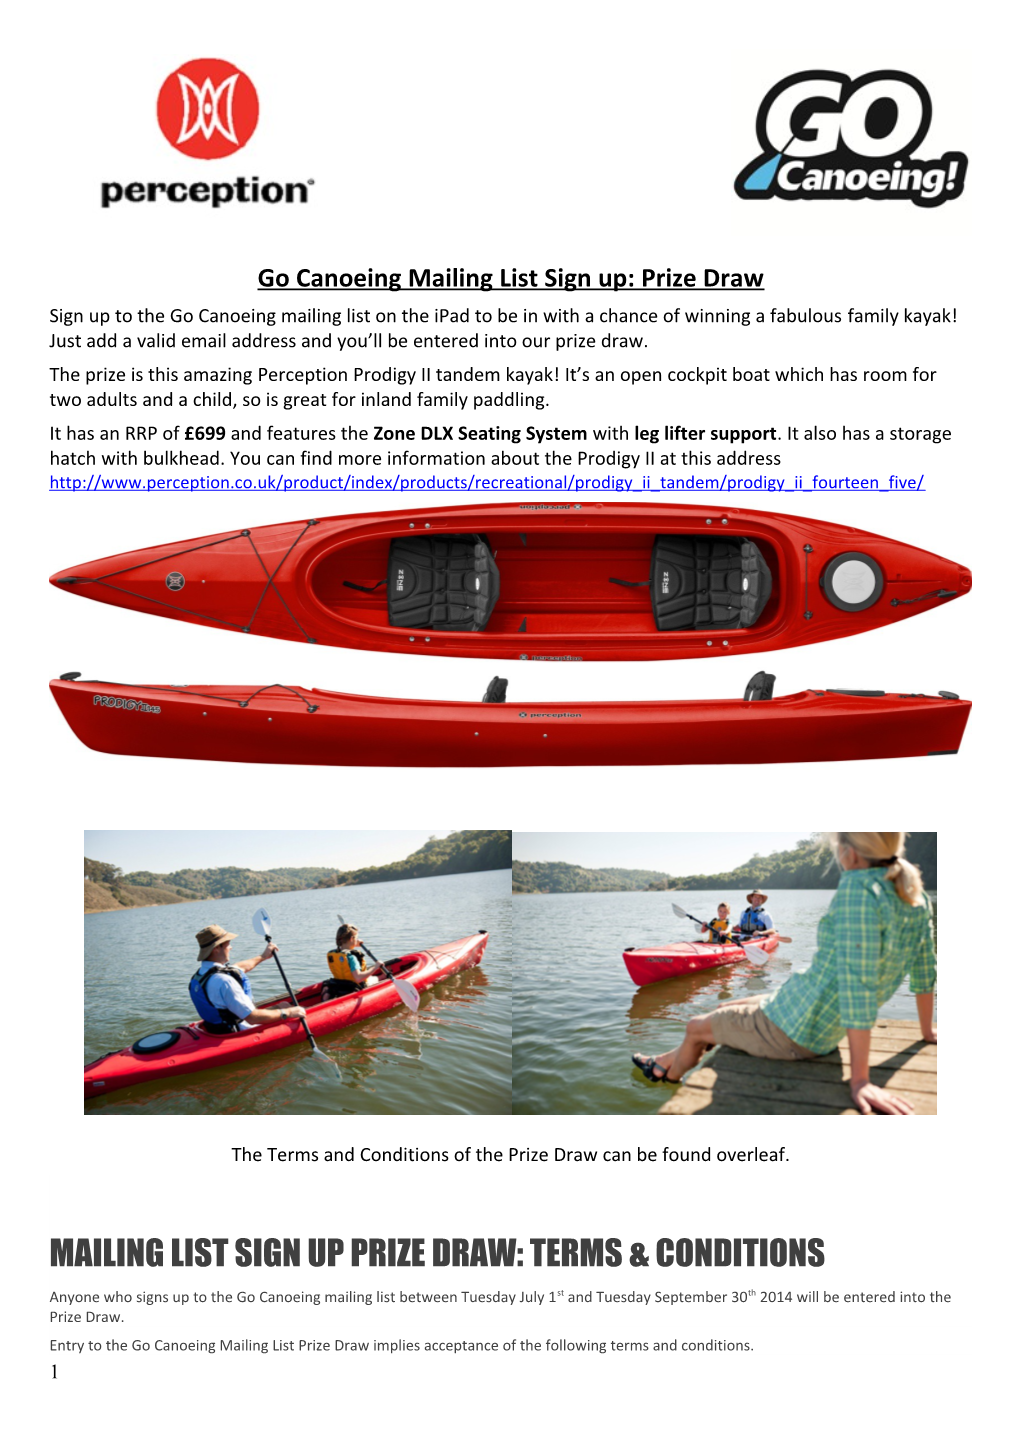 Go Canoeing Mailing List Sign Up: Prize Draw